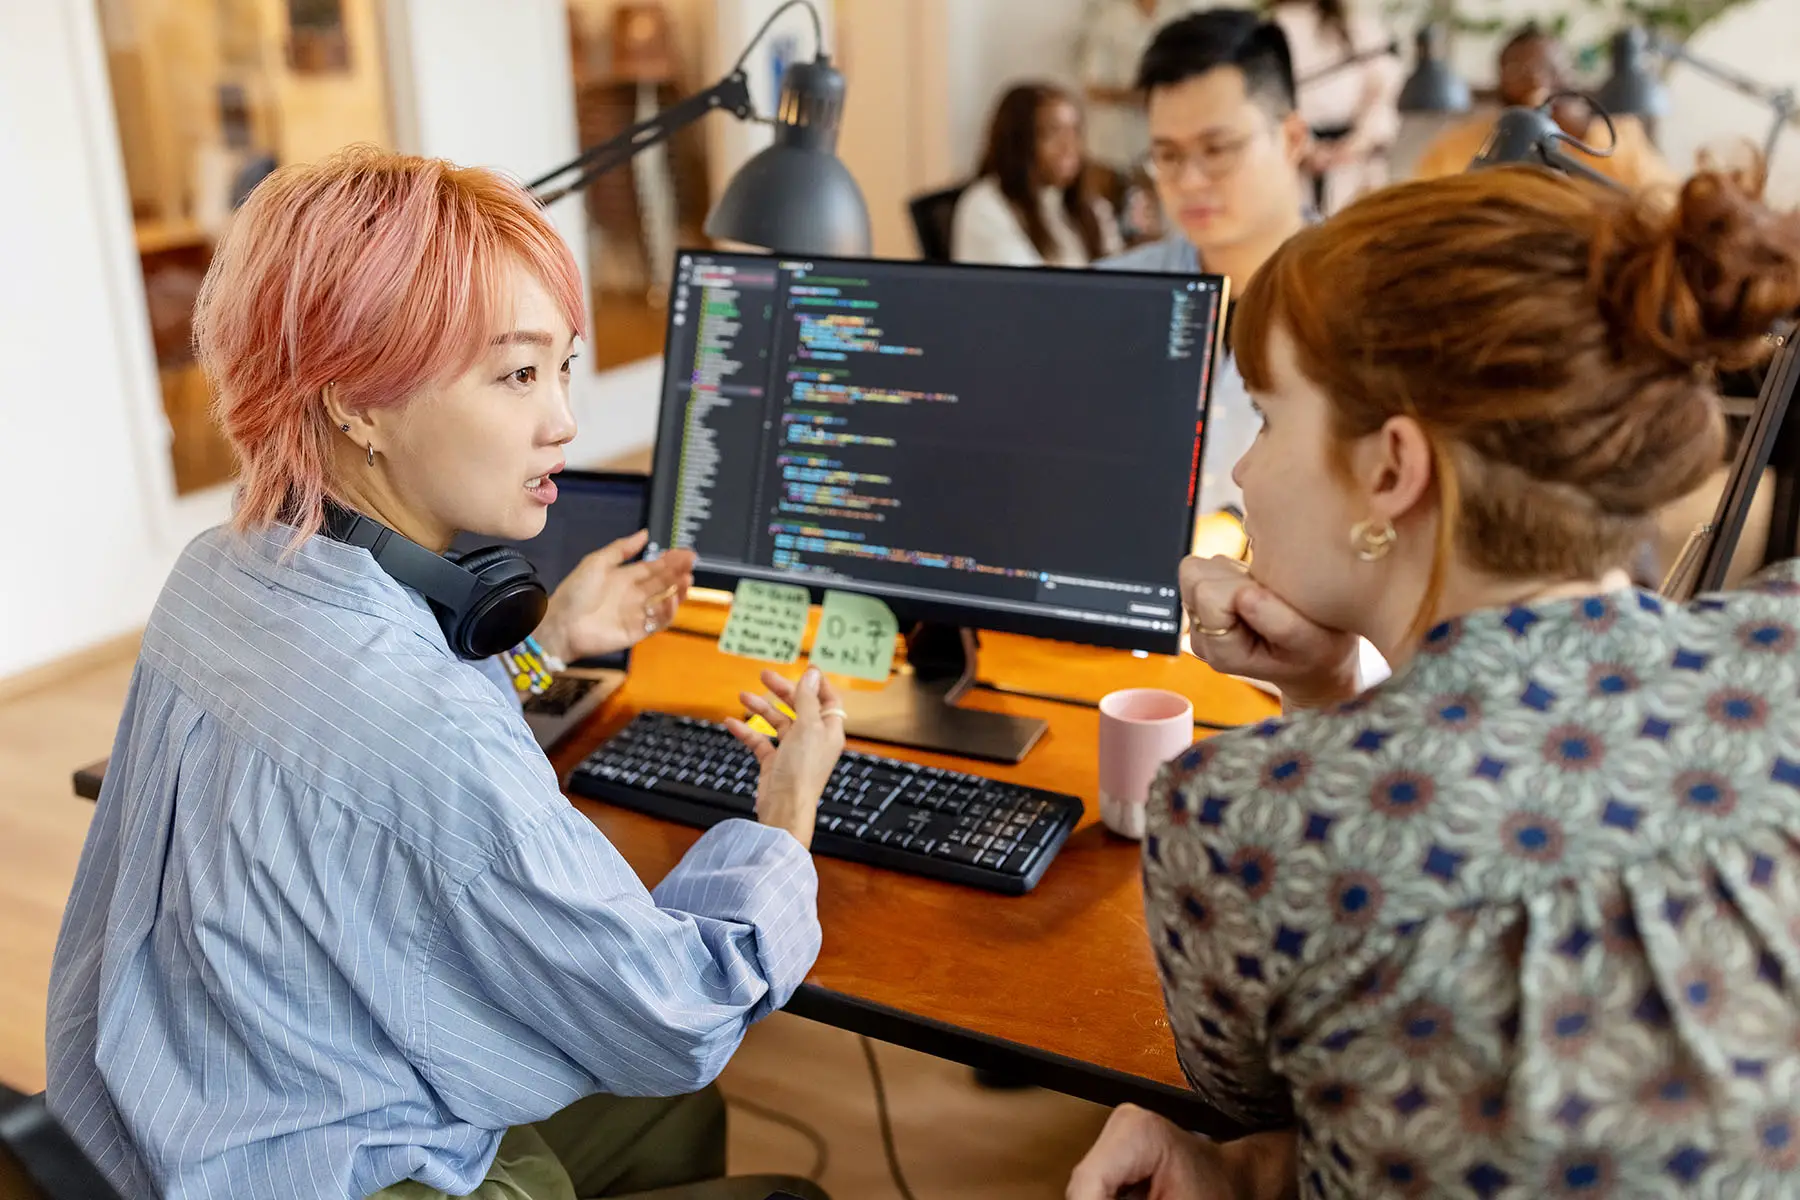 Two women software developers having a discussion while sitting behind a computer at a desk in the workplace.